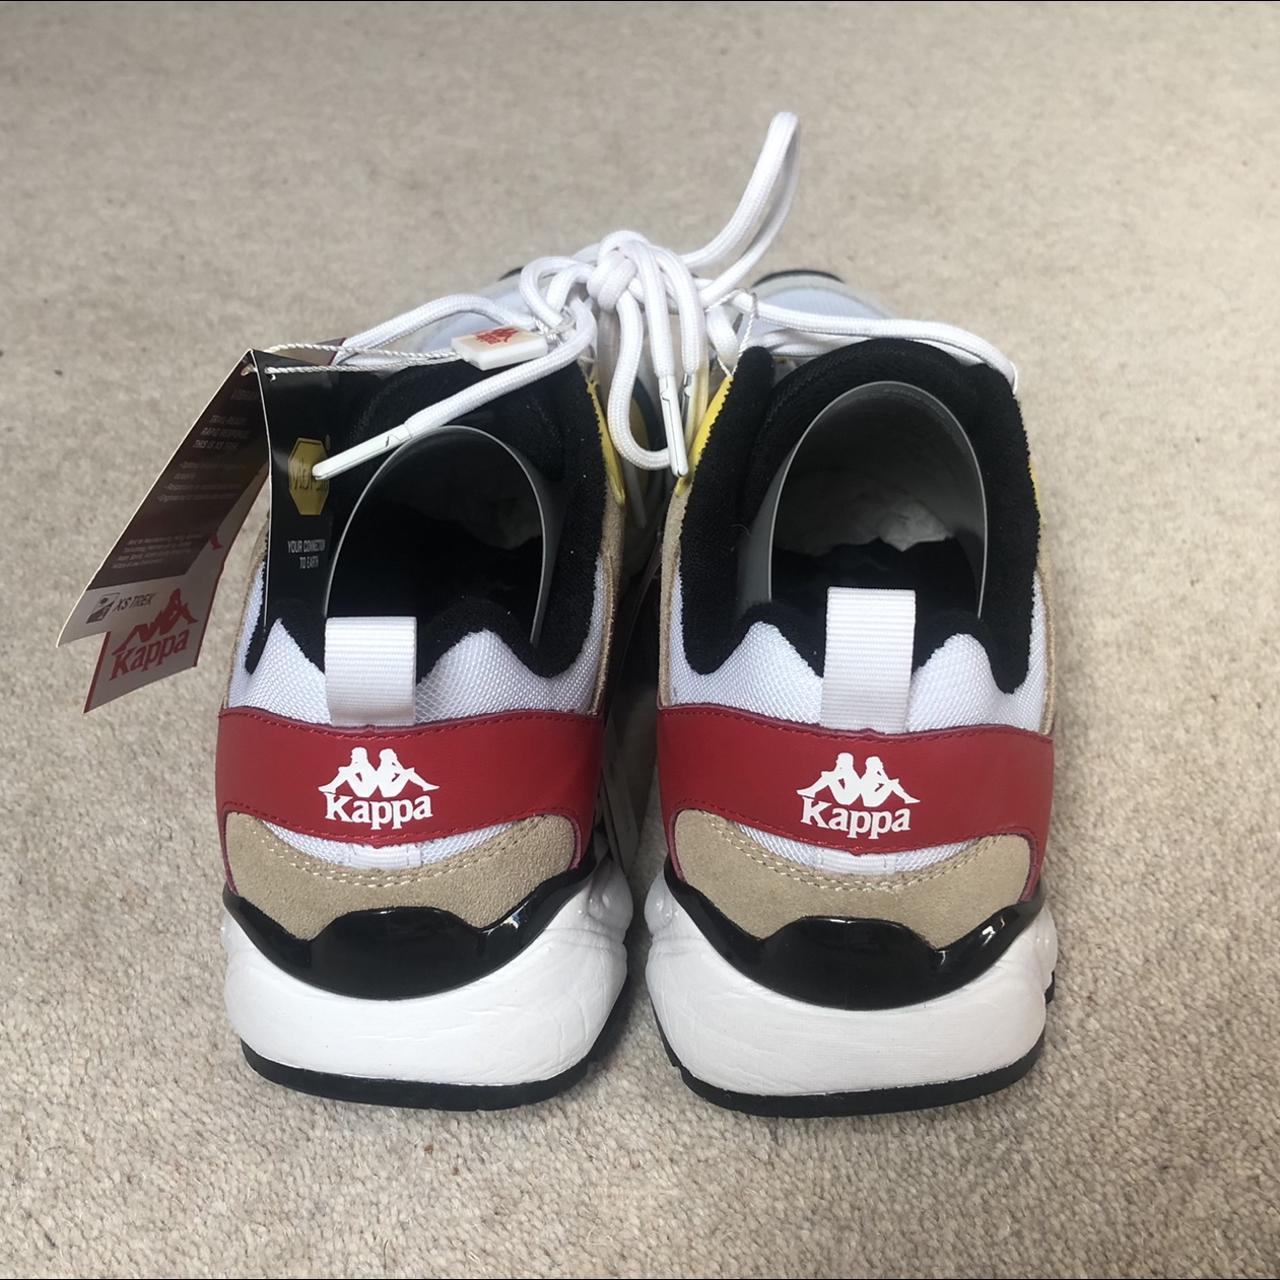 trainers/shoes multi - Brand Depop new Kappa colour with...